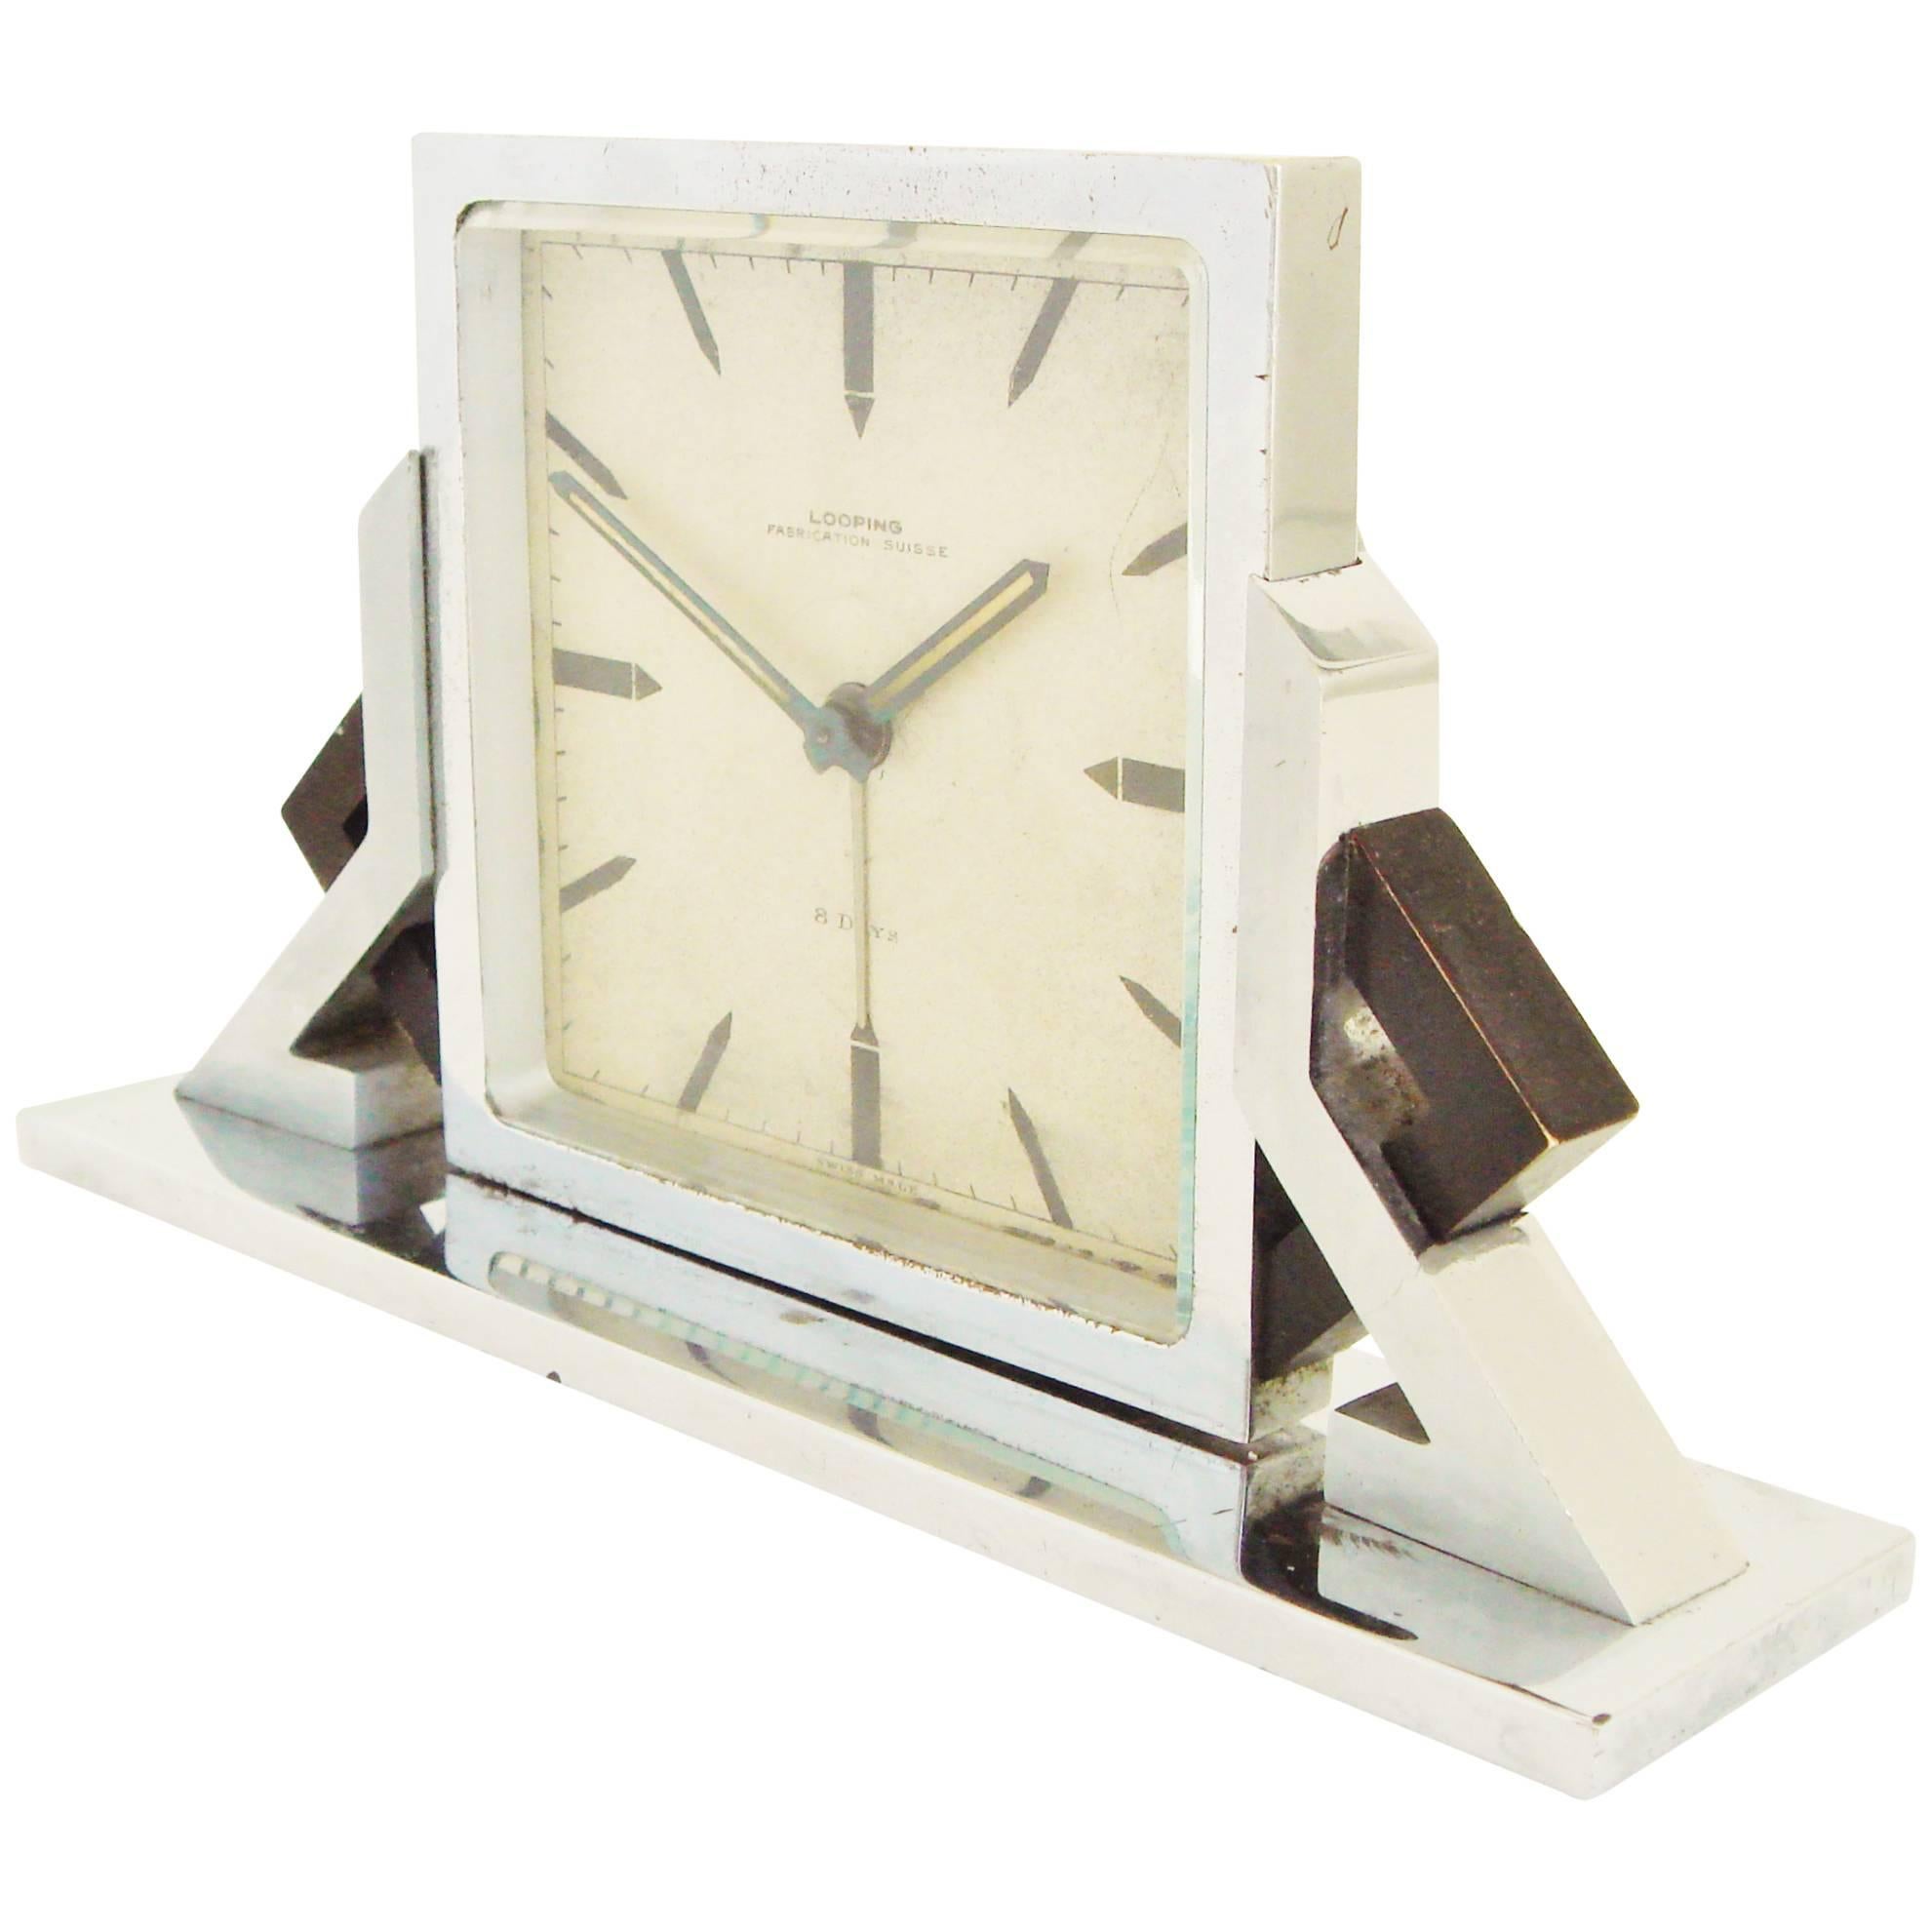 Swiss Art Deco Chrome and Black Enamel Geometric 8-Day Alarm Clock by Looping For Sale